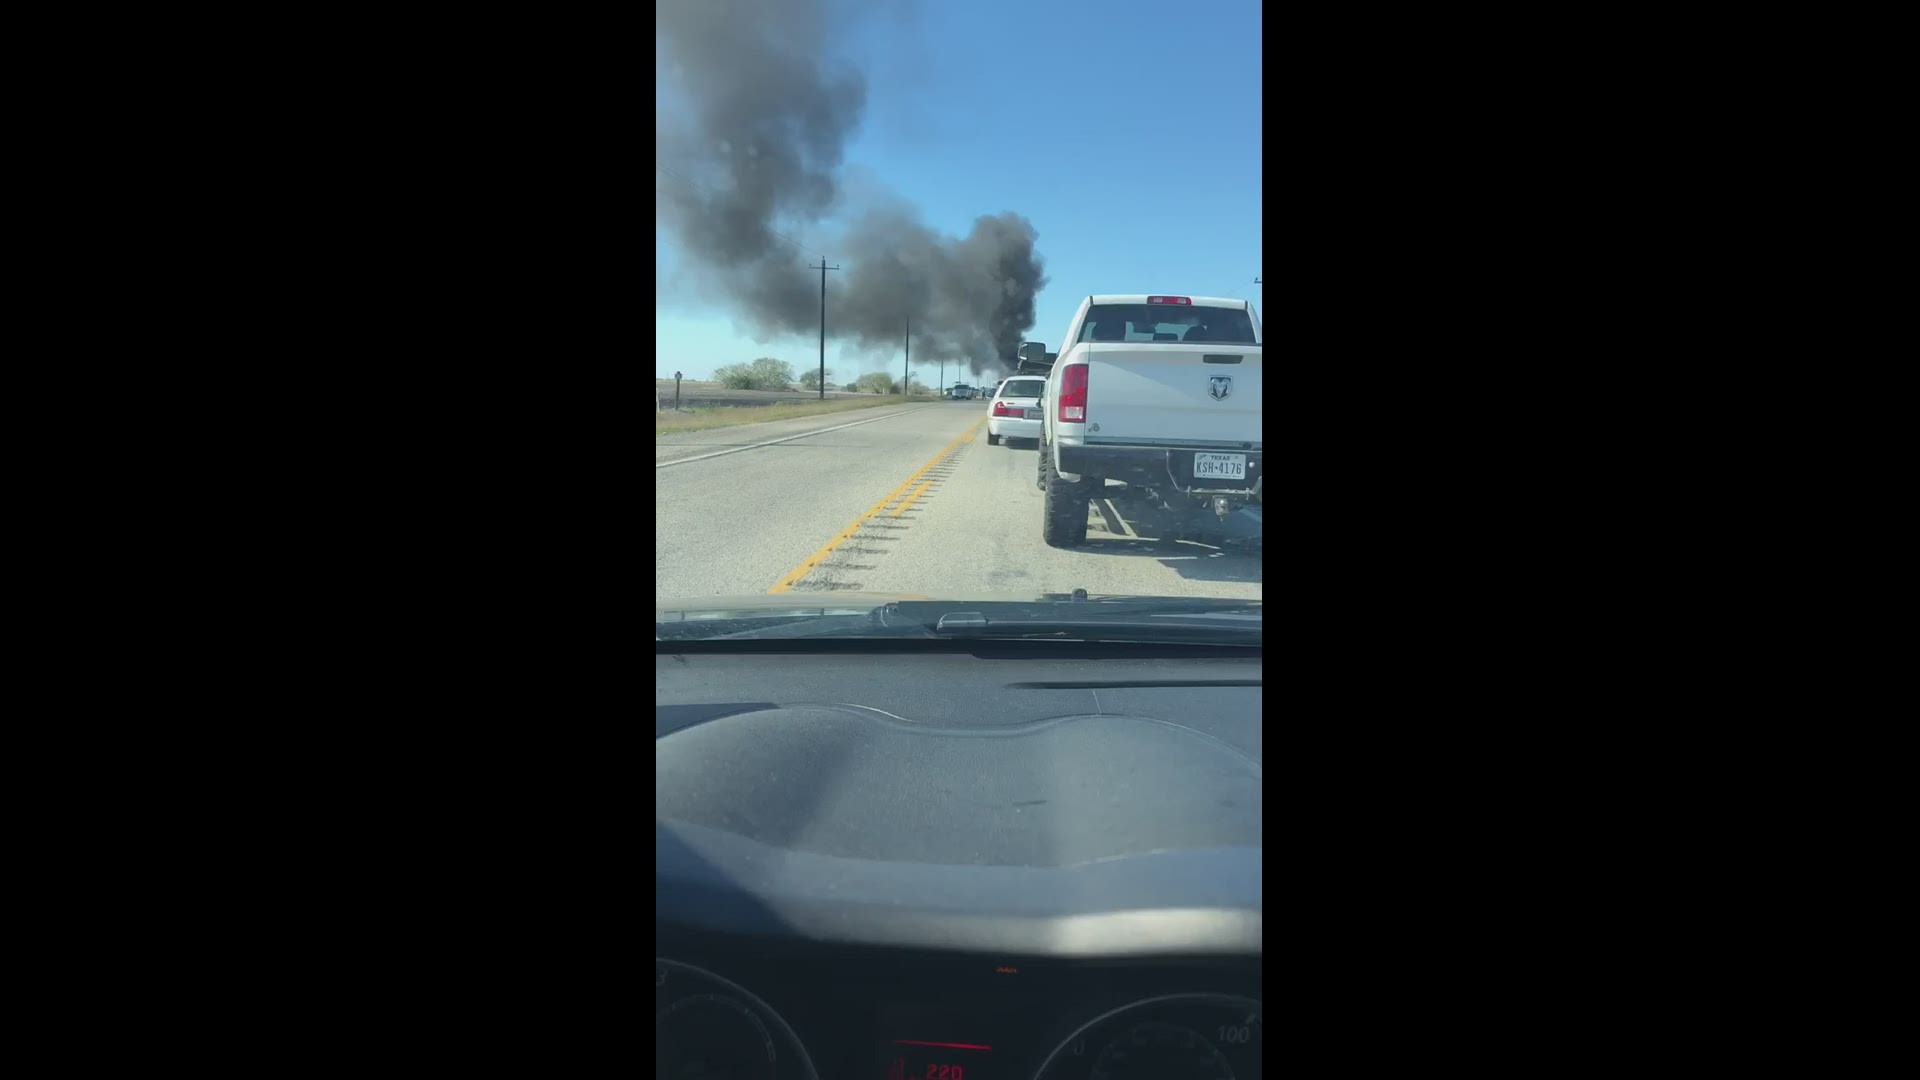 Two vehicles collided and went up in flames near FM 665 and County Road 61 on Sunday afternoon.